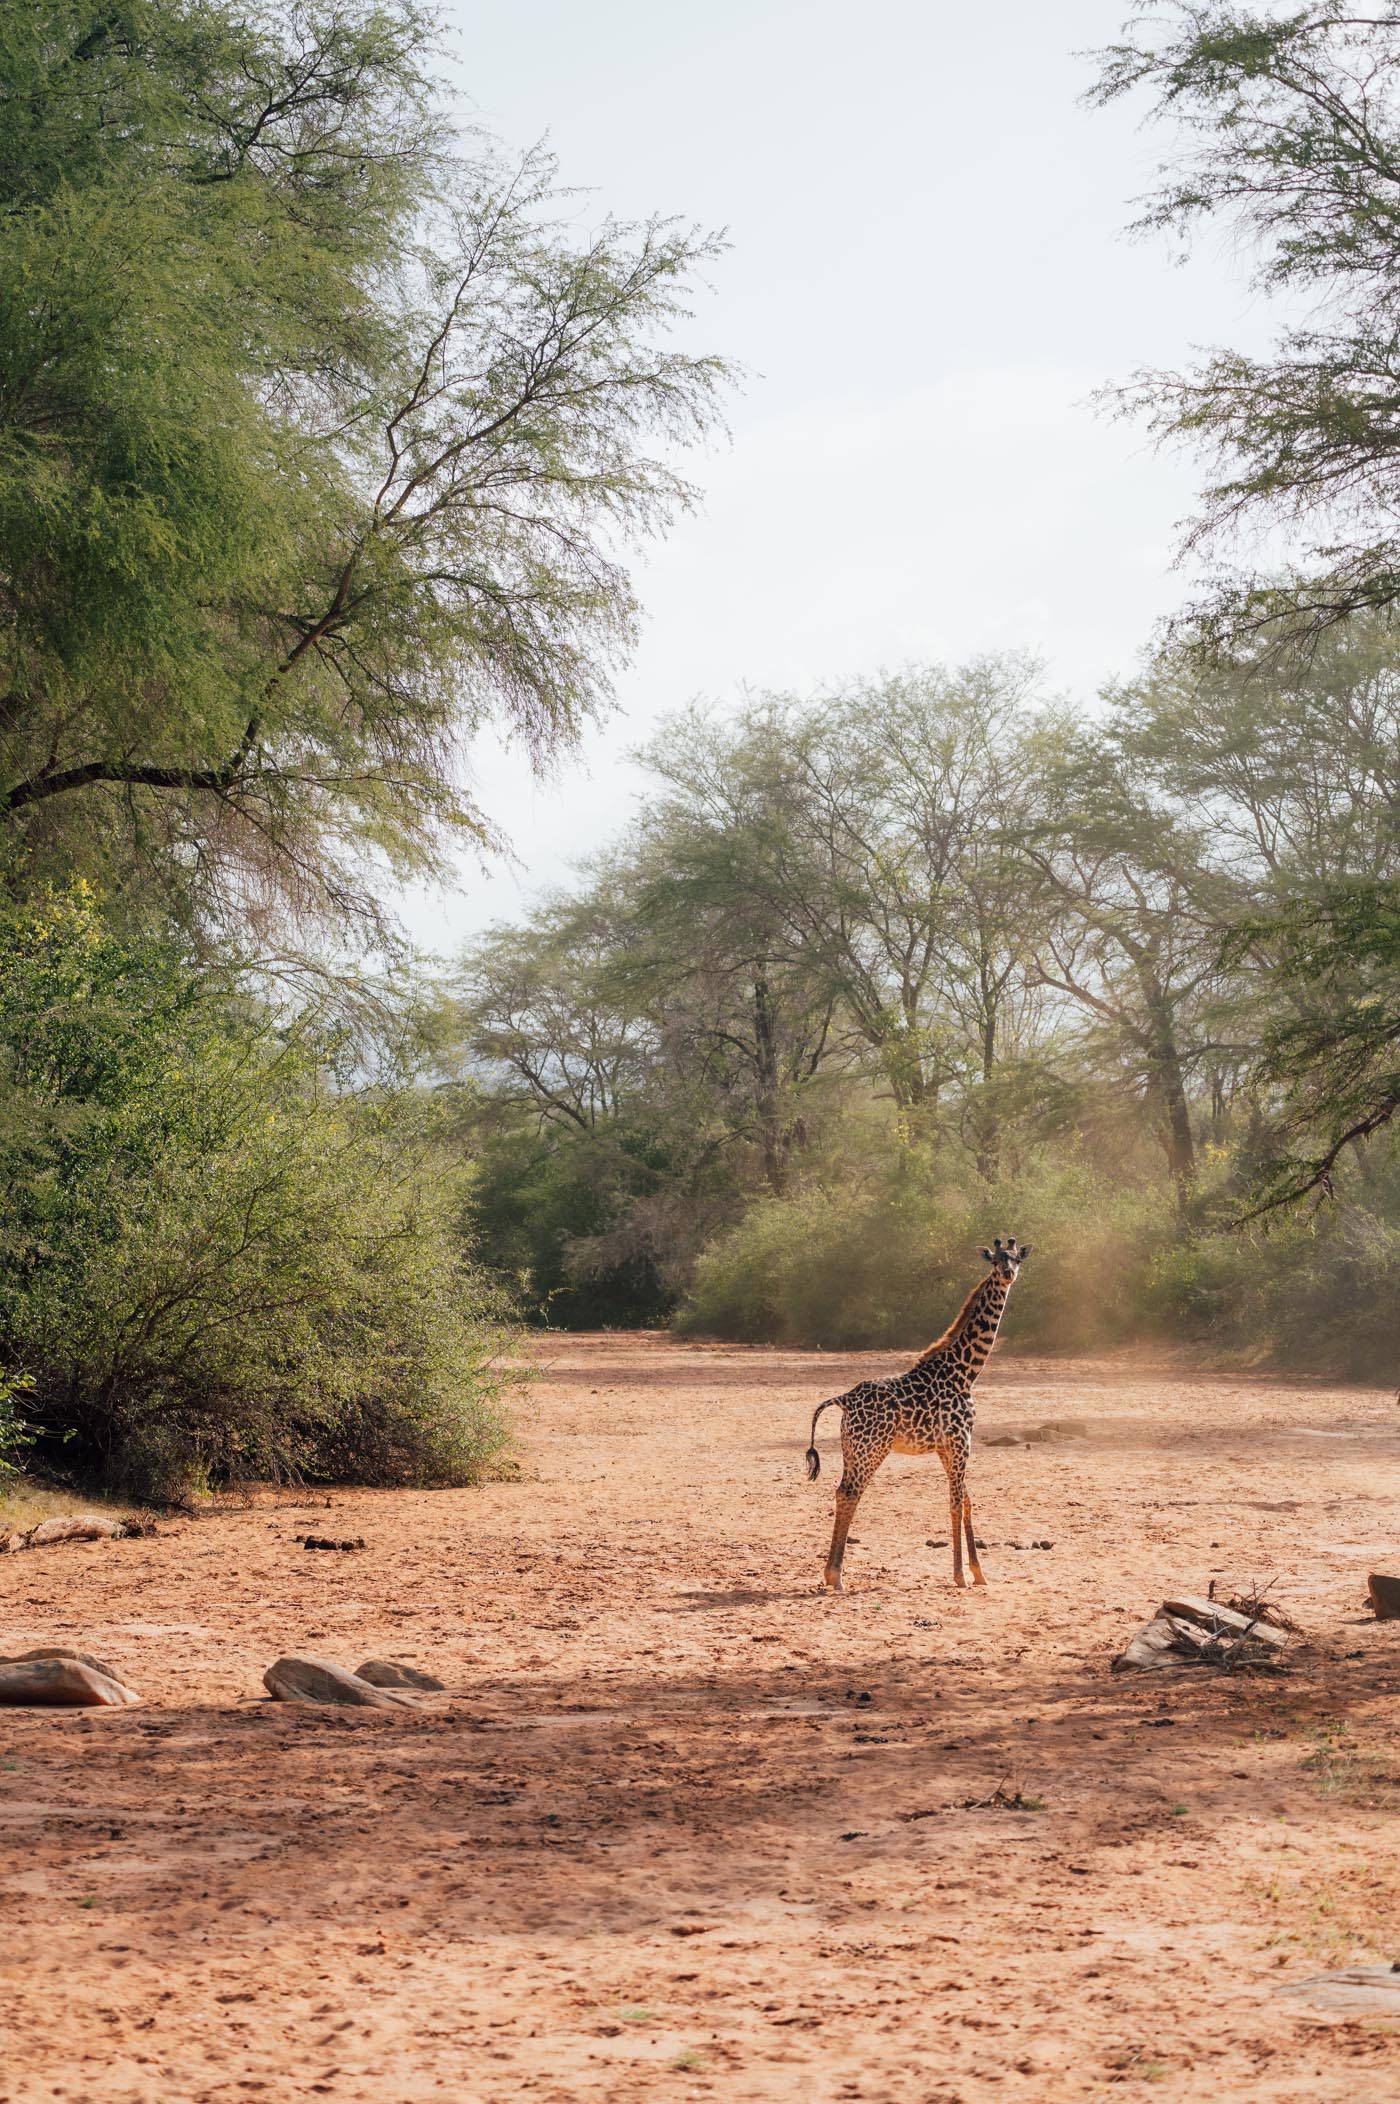 A giraffe in a dried out river bed in Tsavo West